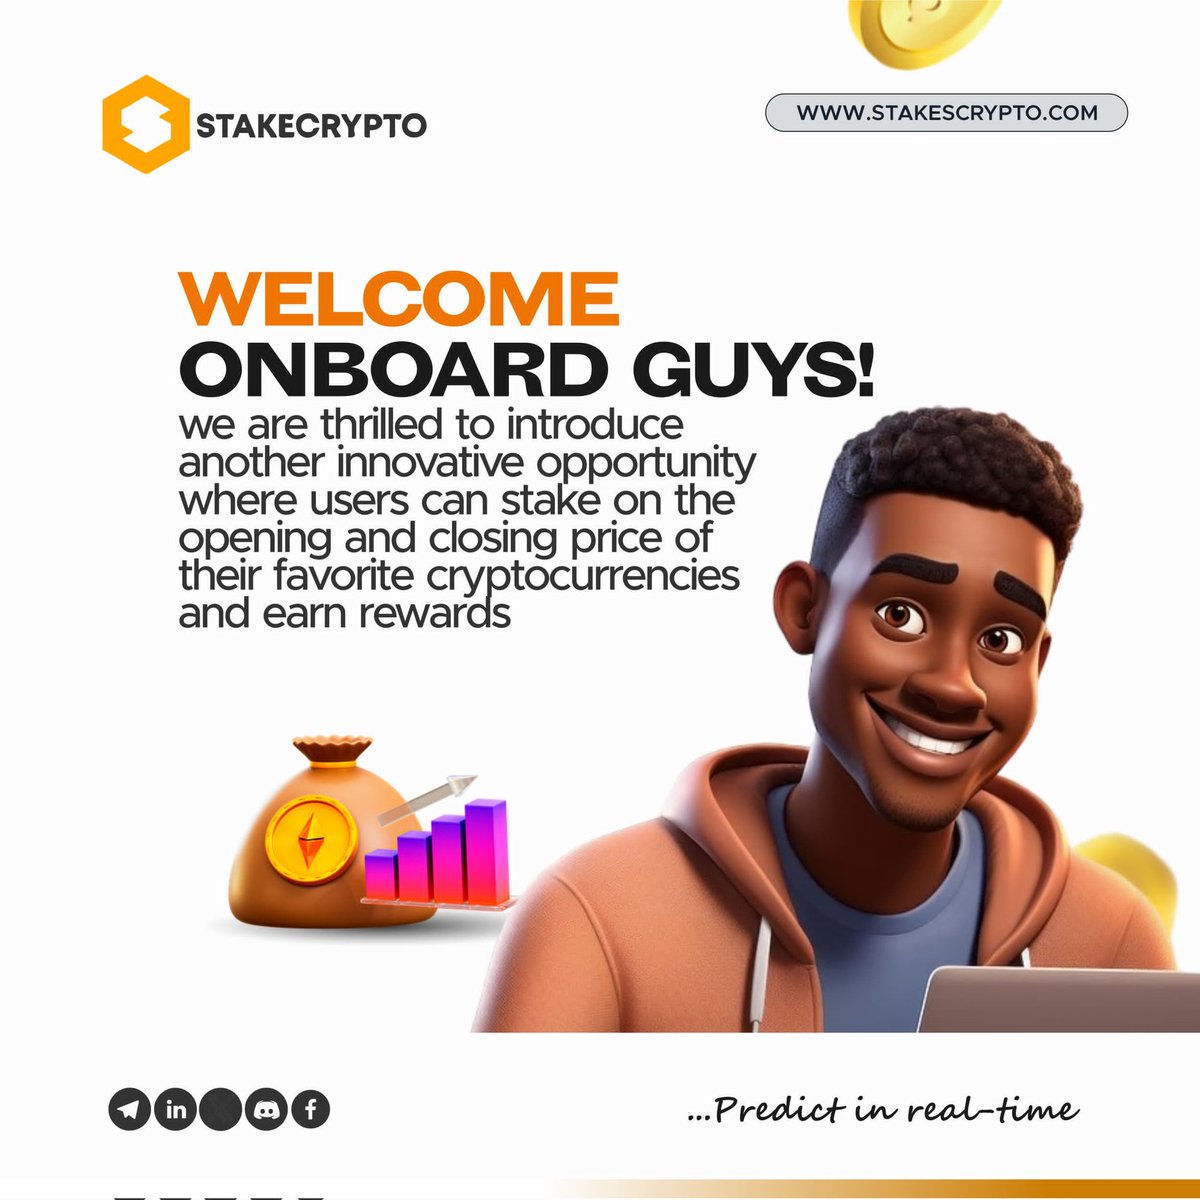 welcome onboard guys!,we are thrilled to introduce another innovative opportunity where  users can stake on the opening and closing price of their favorite cryptocurrencies and earn rewards #CryptoStaking #NewBeginnings